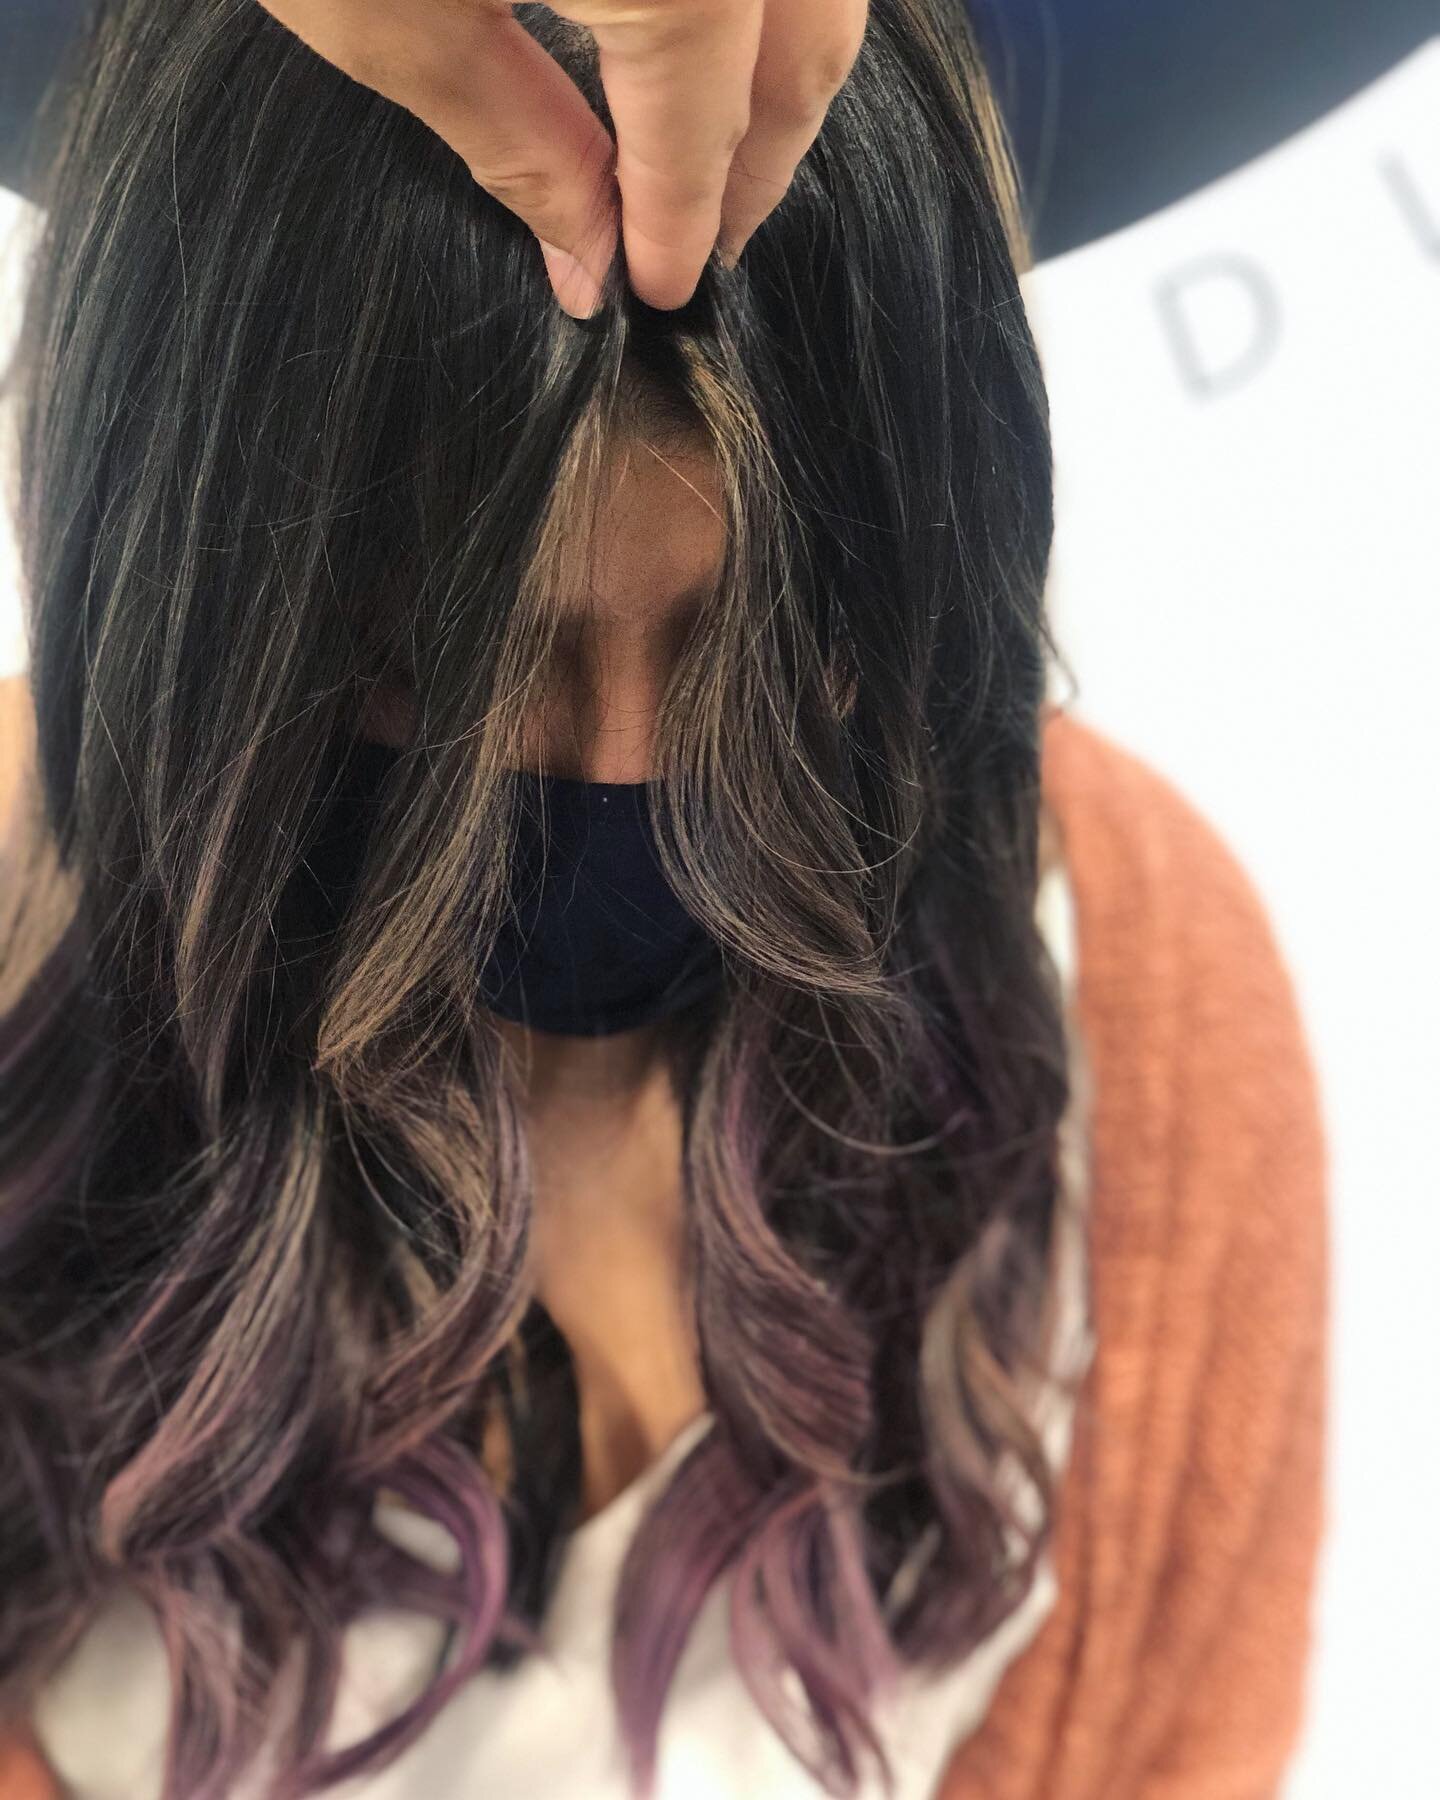 What do you think 😁

We did a balayage and toned her hair with 8vb, and 8t! And melted it down with some purple 👌🏼